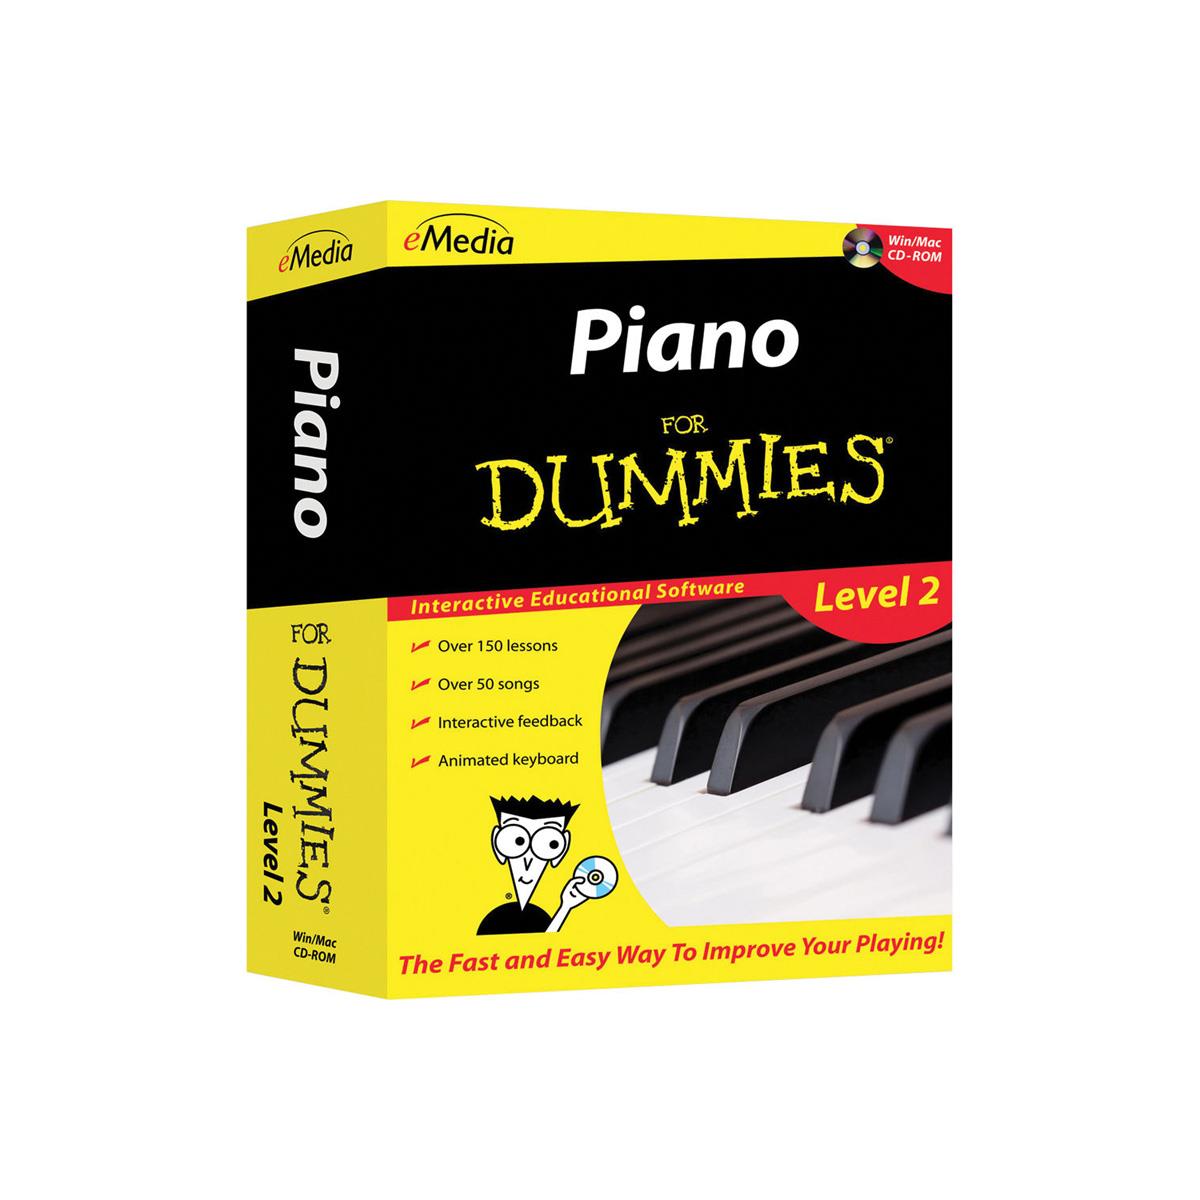 eMedia Piano For Dummies Level 2 Software for Windows, Electronic Download -  FD09108DLW